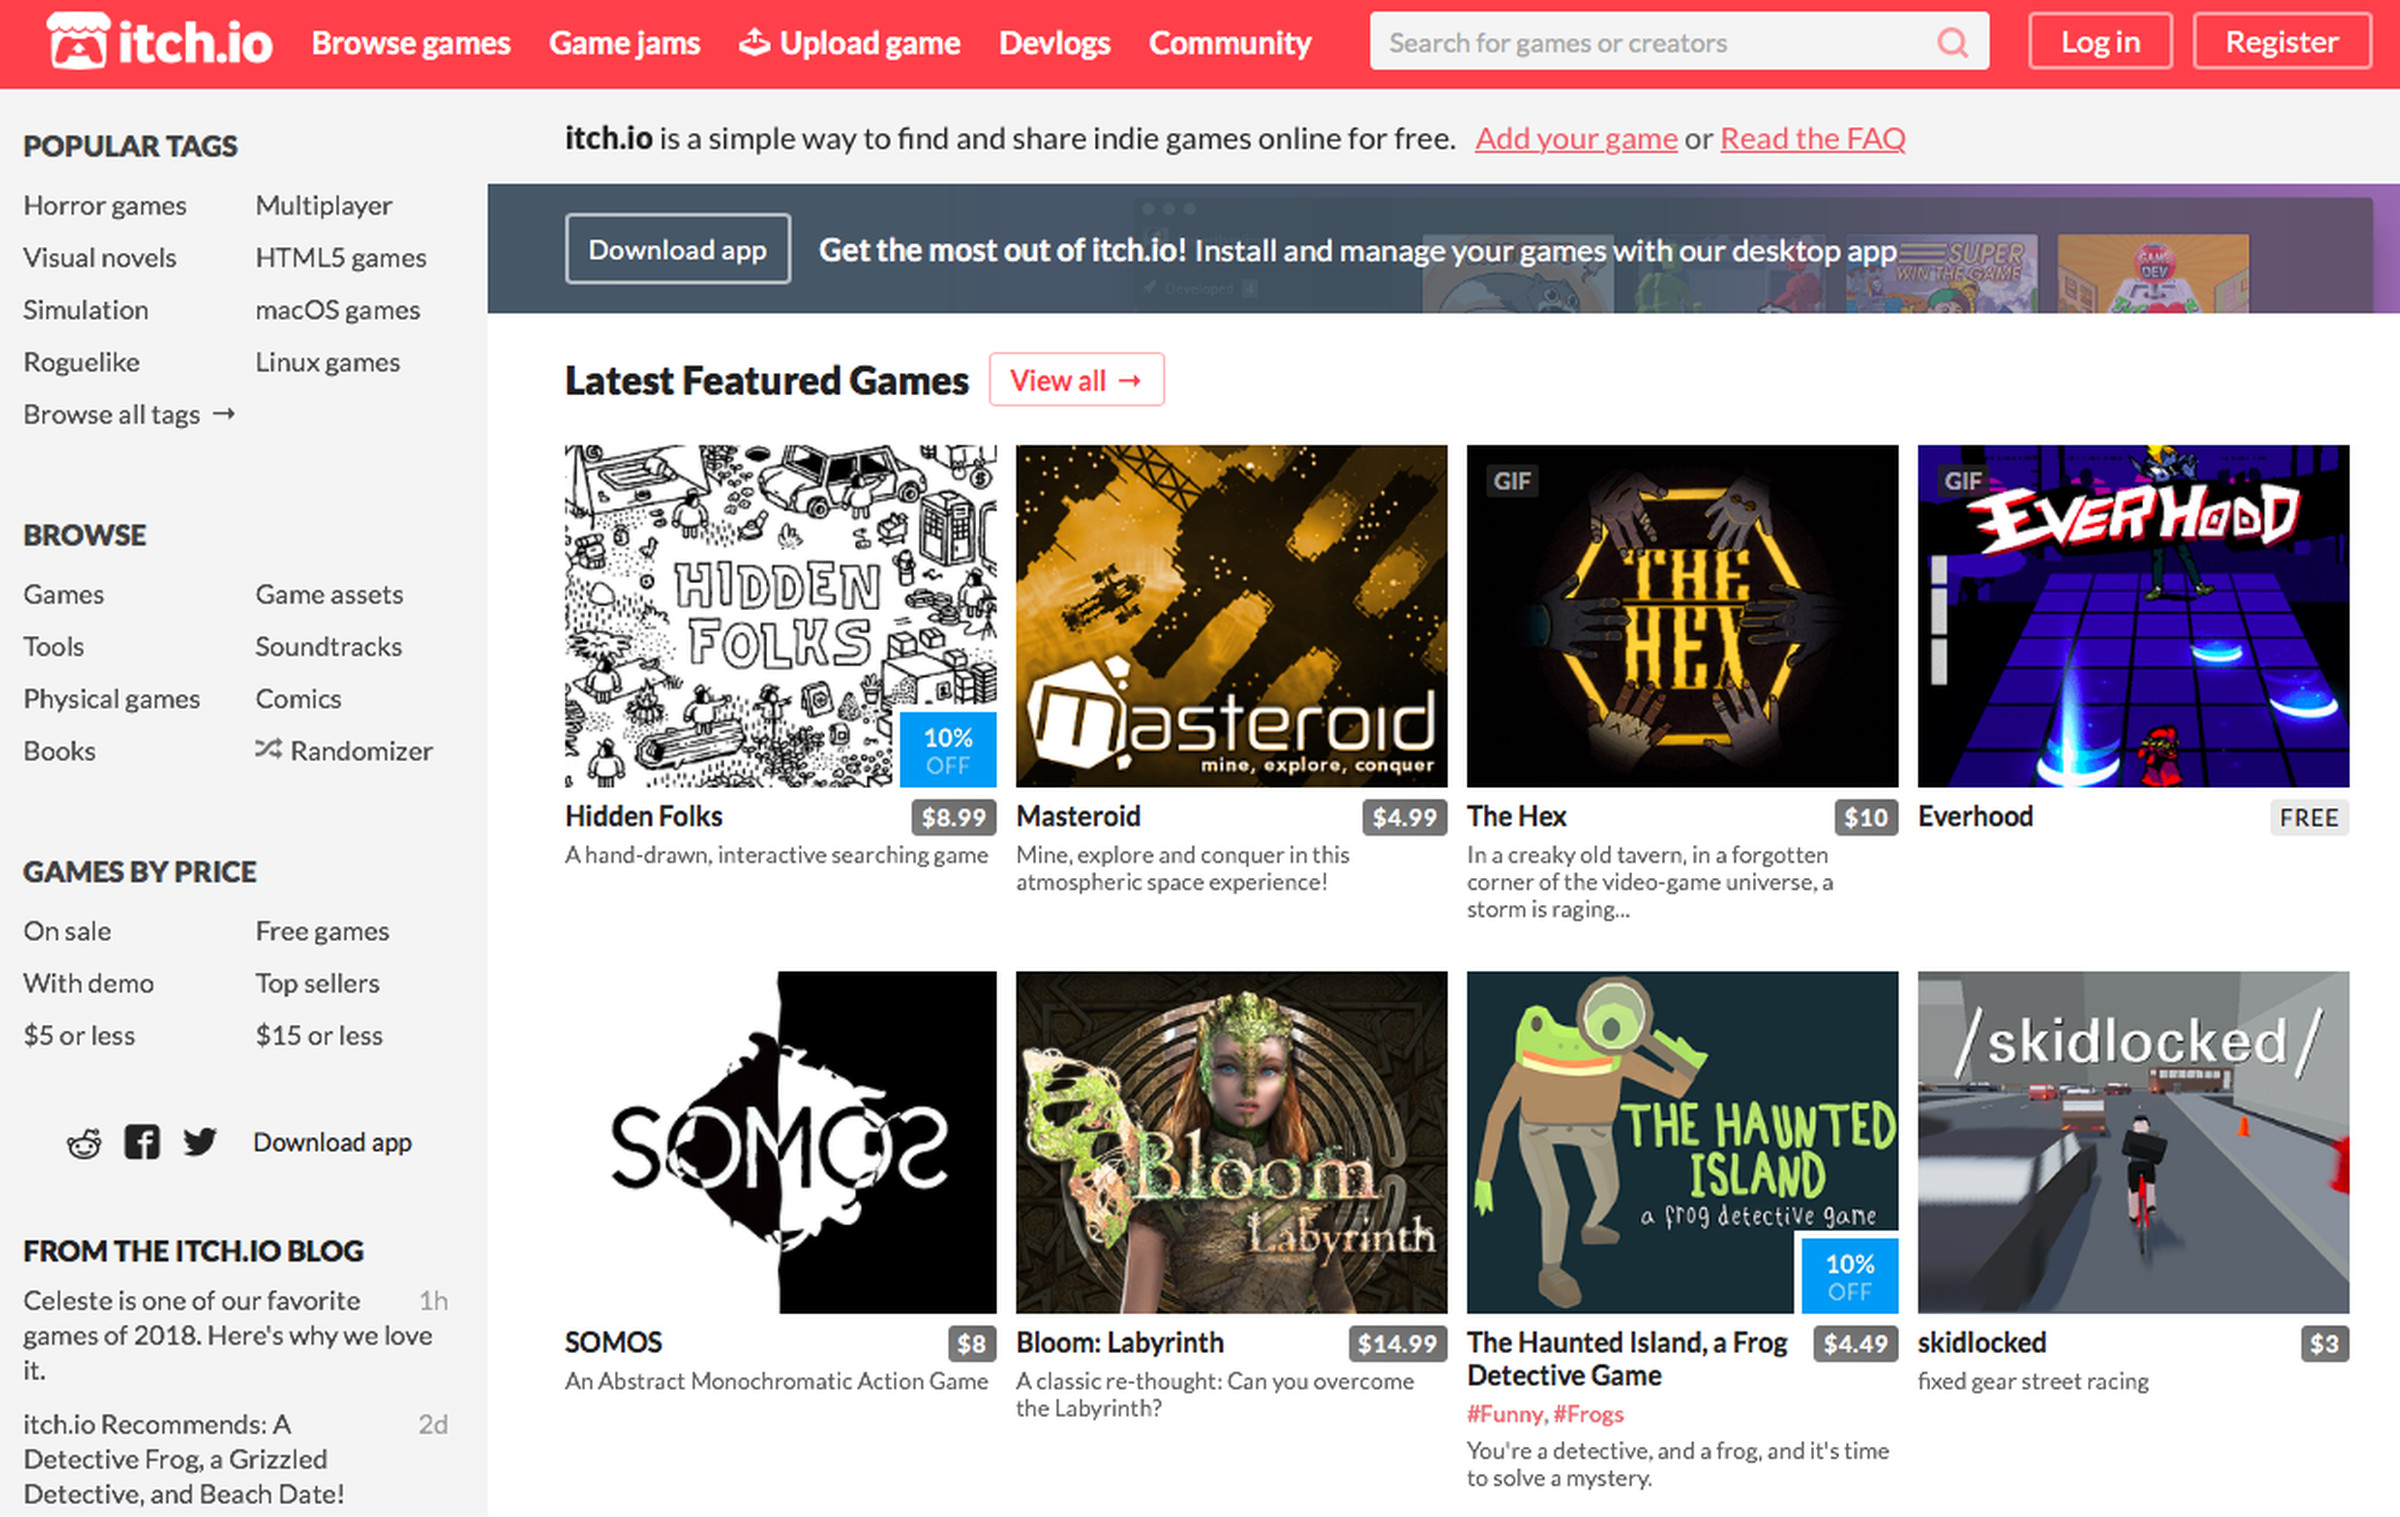 Itchio’s online storefront